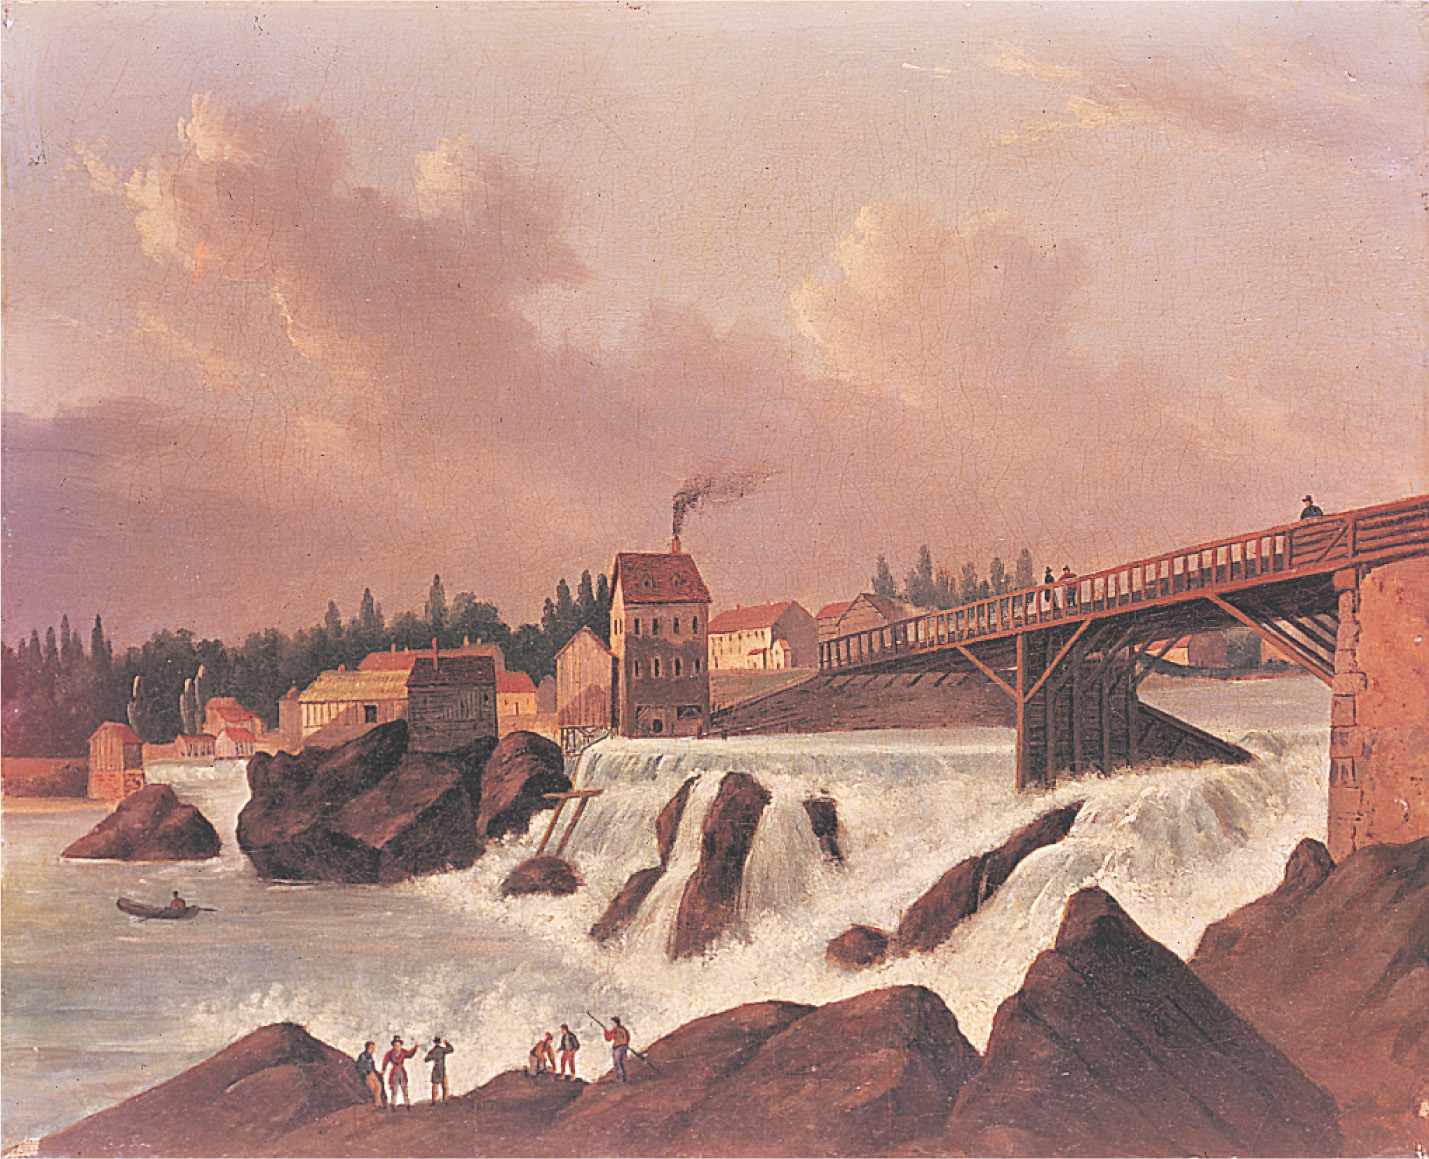 A painting: smoke rises from a factory chimney, by a
footbridge over a rushing river.